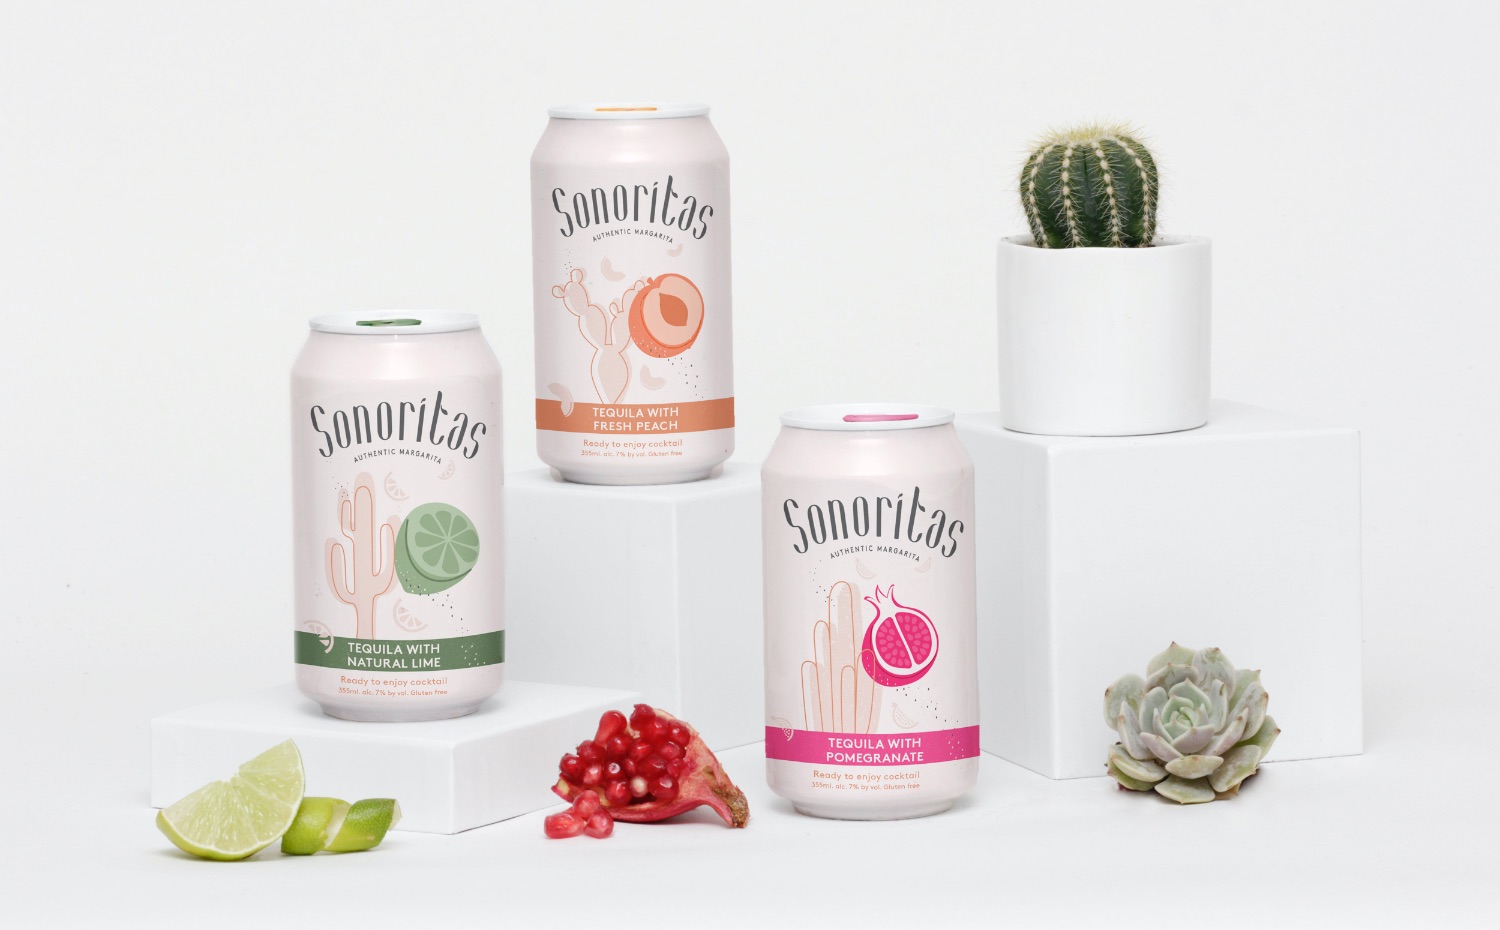 Sonoritas Margarita Cocktail Branding and Packaging Design Concept by Student